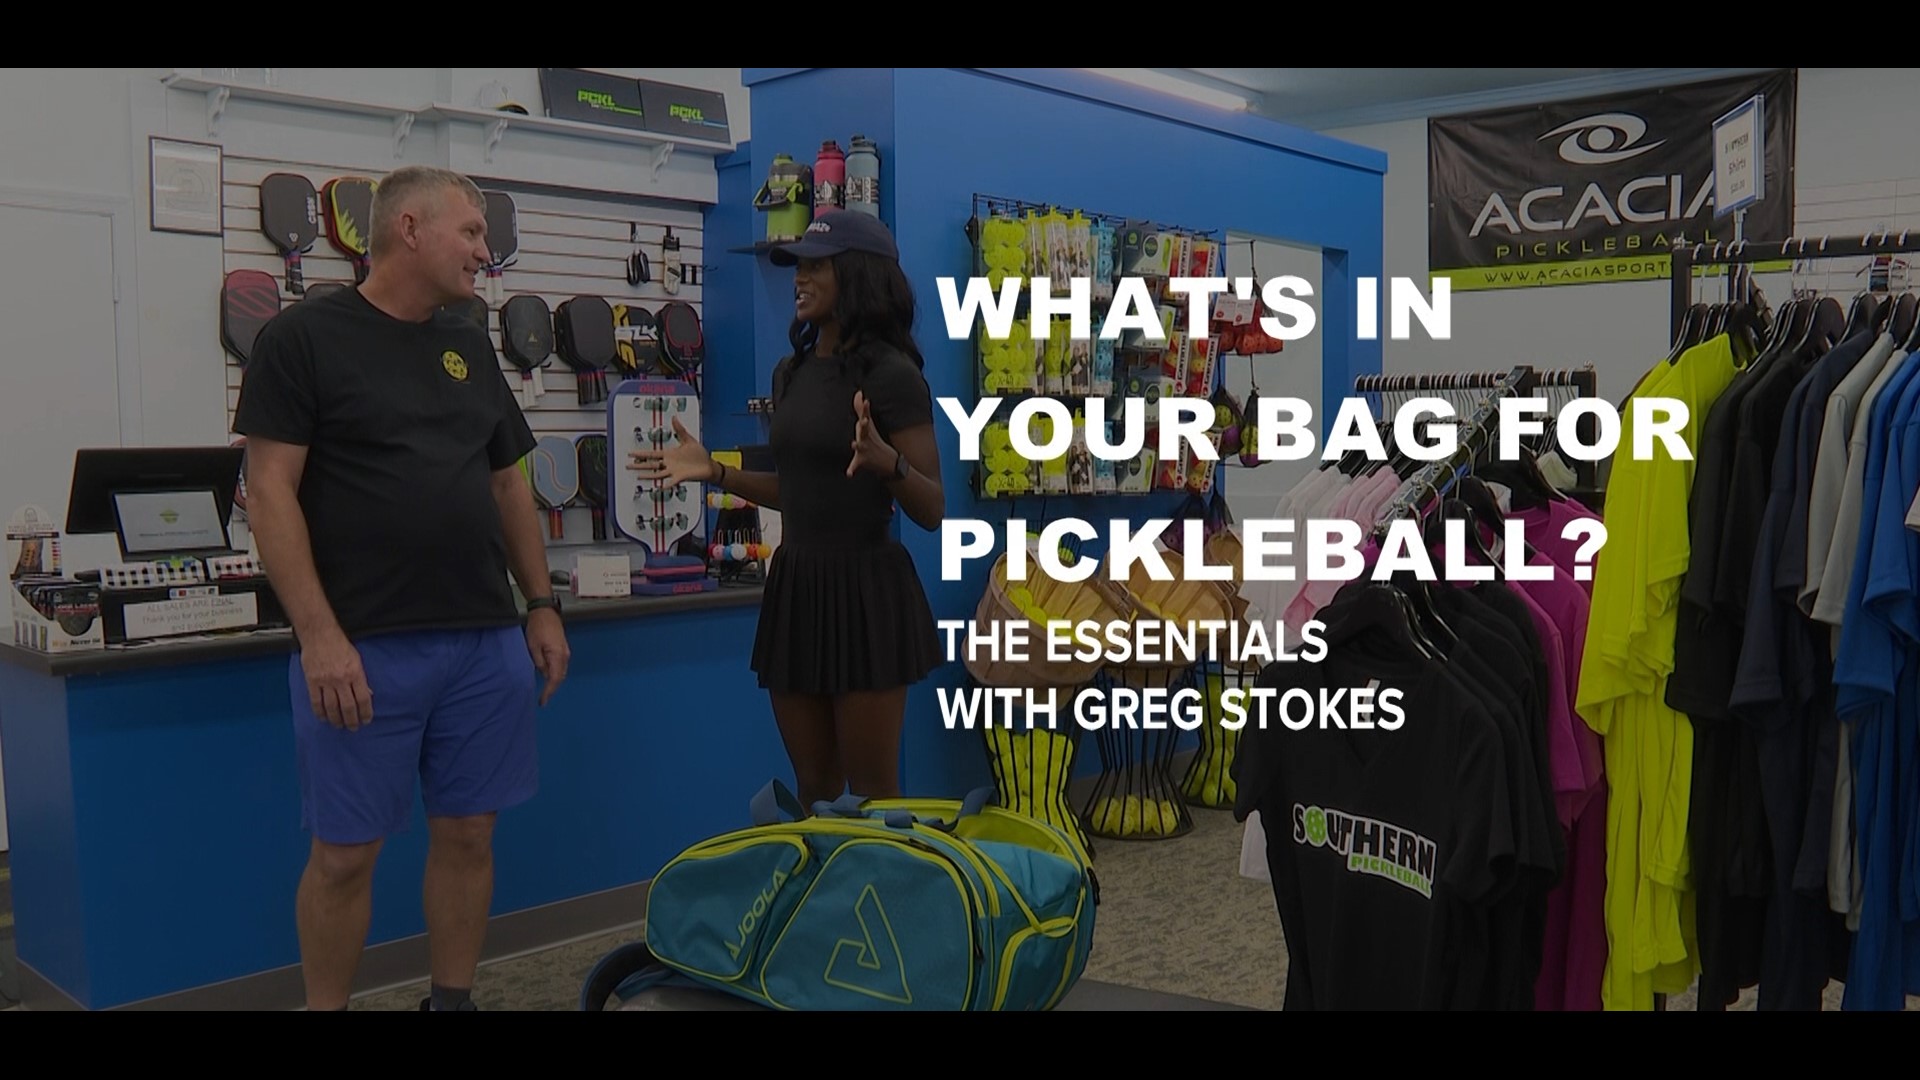 With Pickleball being all the craze, here are the materials you need to get your head into the game.